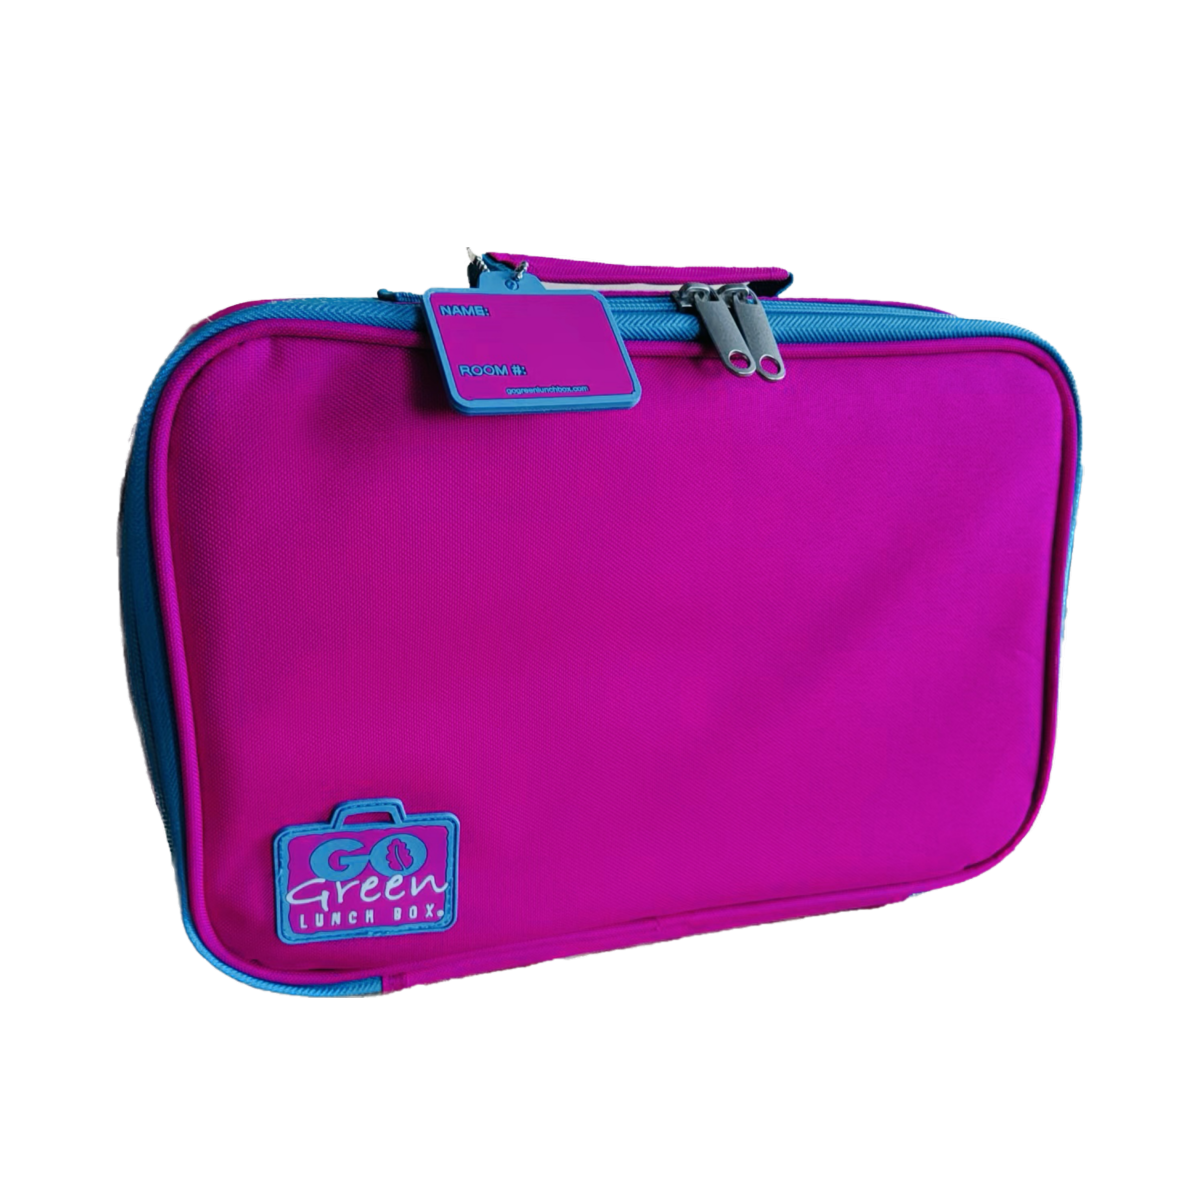 Go Green Insulated Carrying Case: Pretty 'n Pink